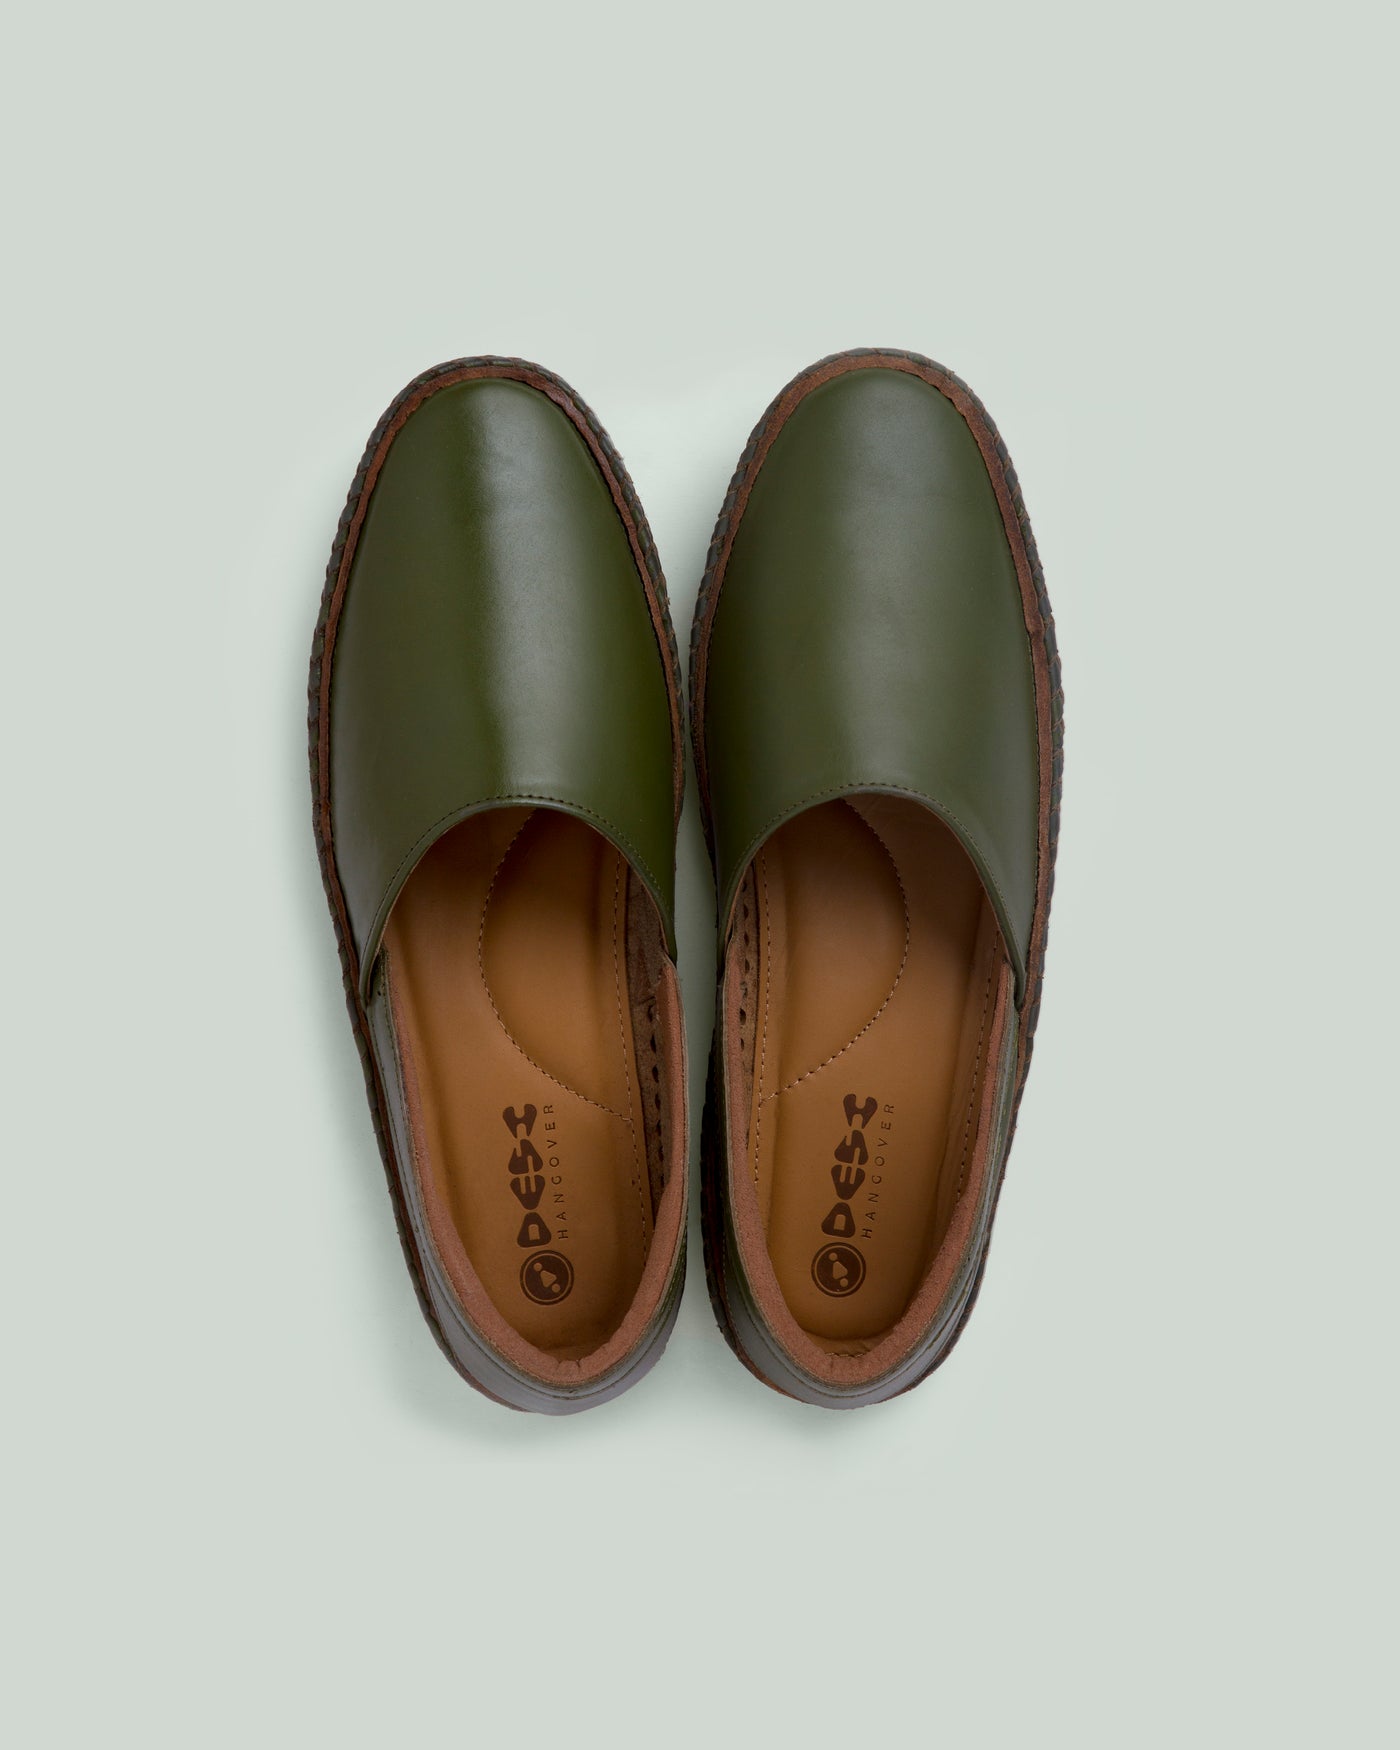 Fireworkshouse-handmade-leather-shoes-TYCOON OLIVE GREEN